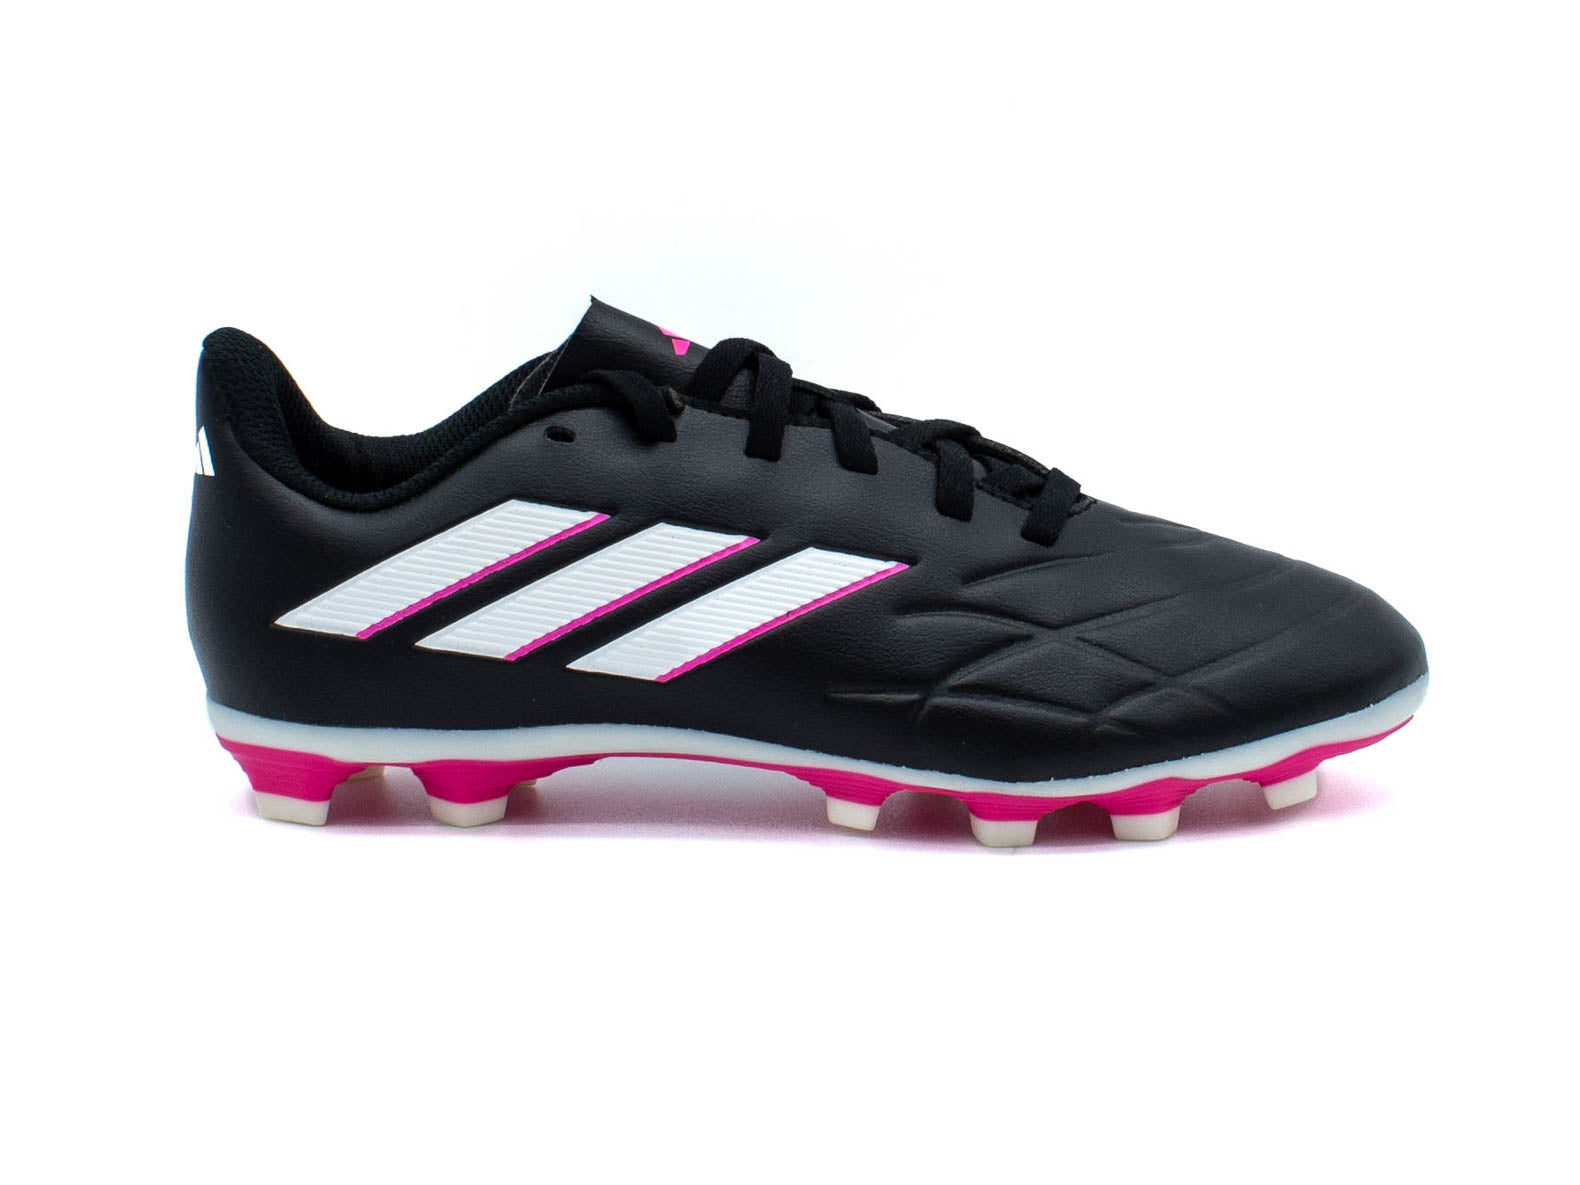 ADIDAS COPA PURE.4 FLEXIBLE GROUND CLEATS